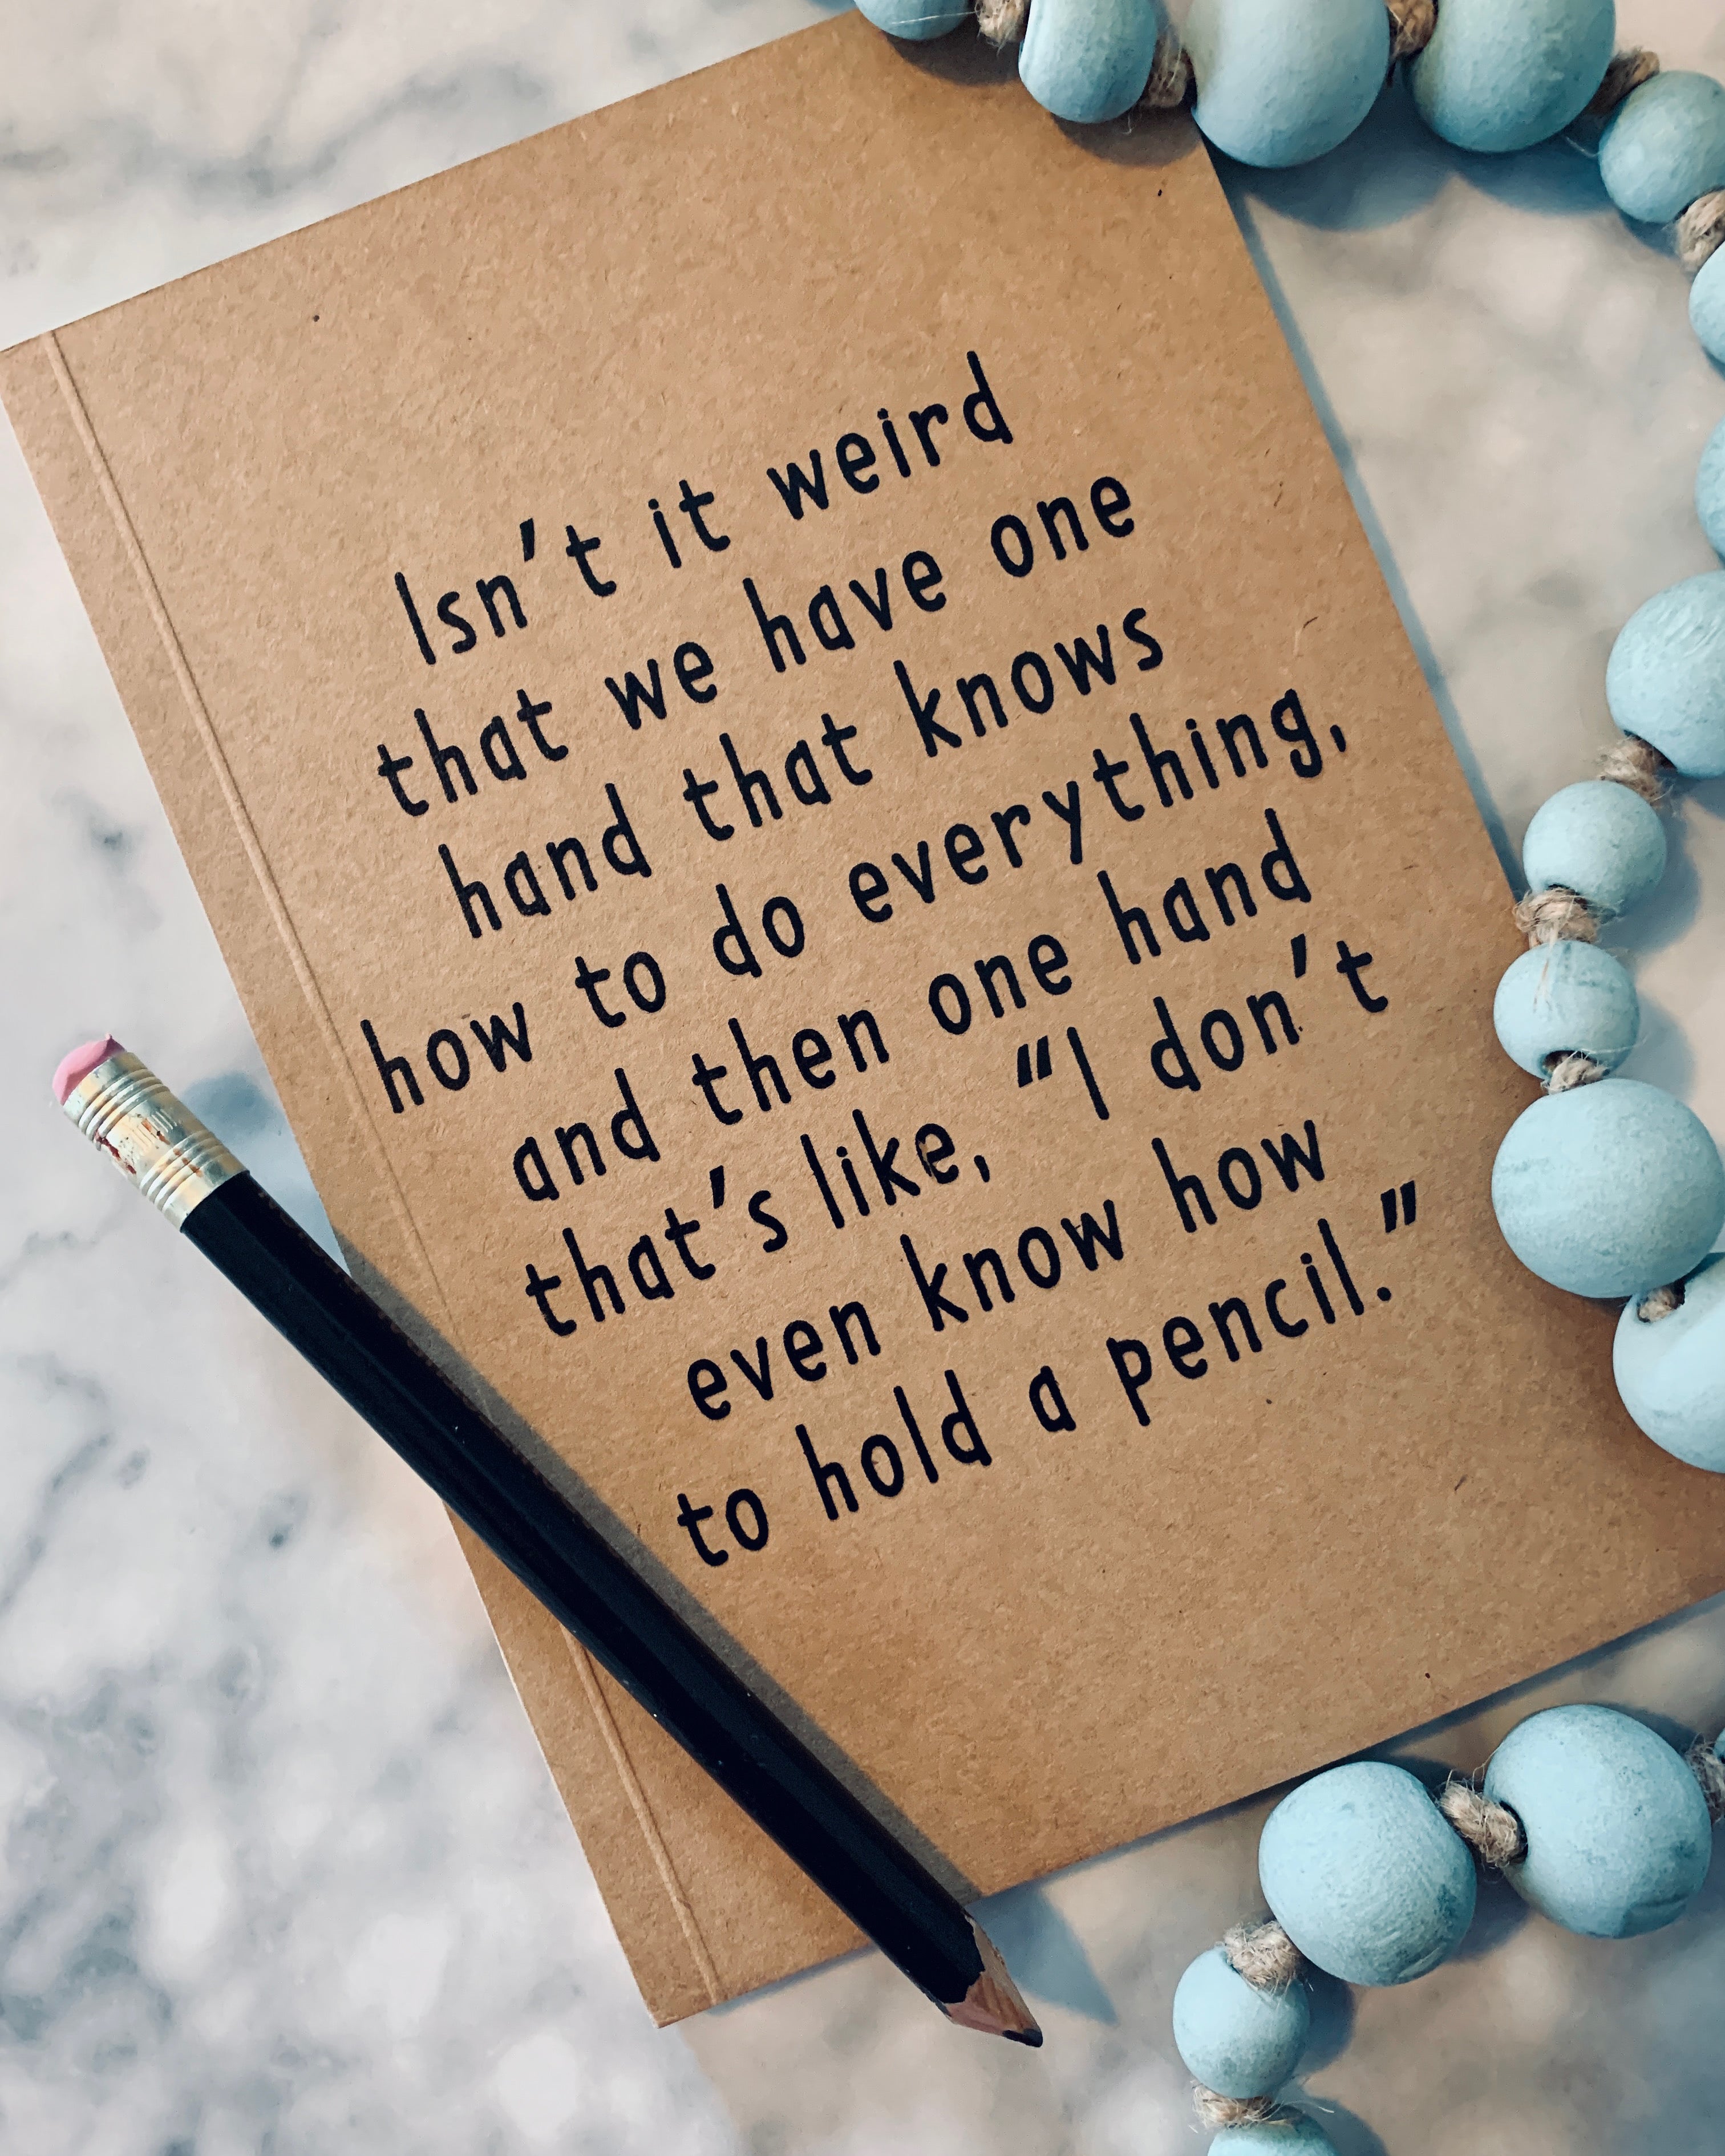 Isn't it weird that we have one hand that knows how to do everything, and one hand that's like, "I don't even know how to hold a pencil." kraft notebook